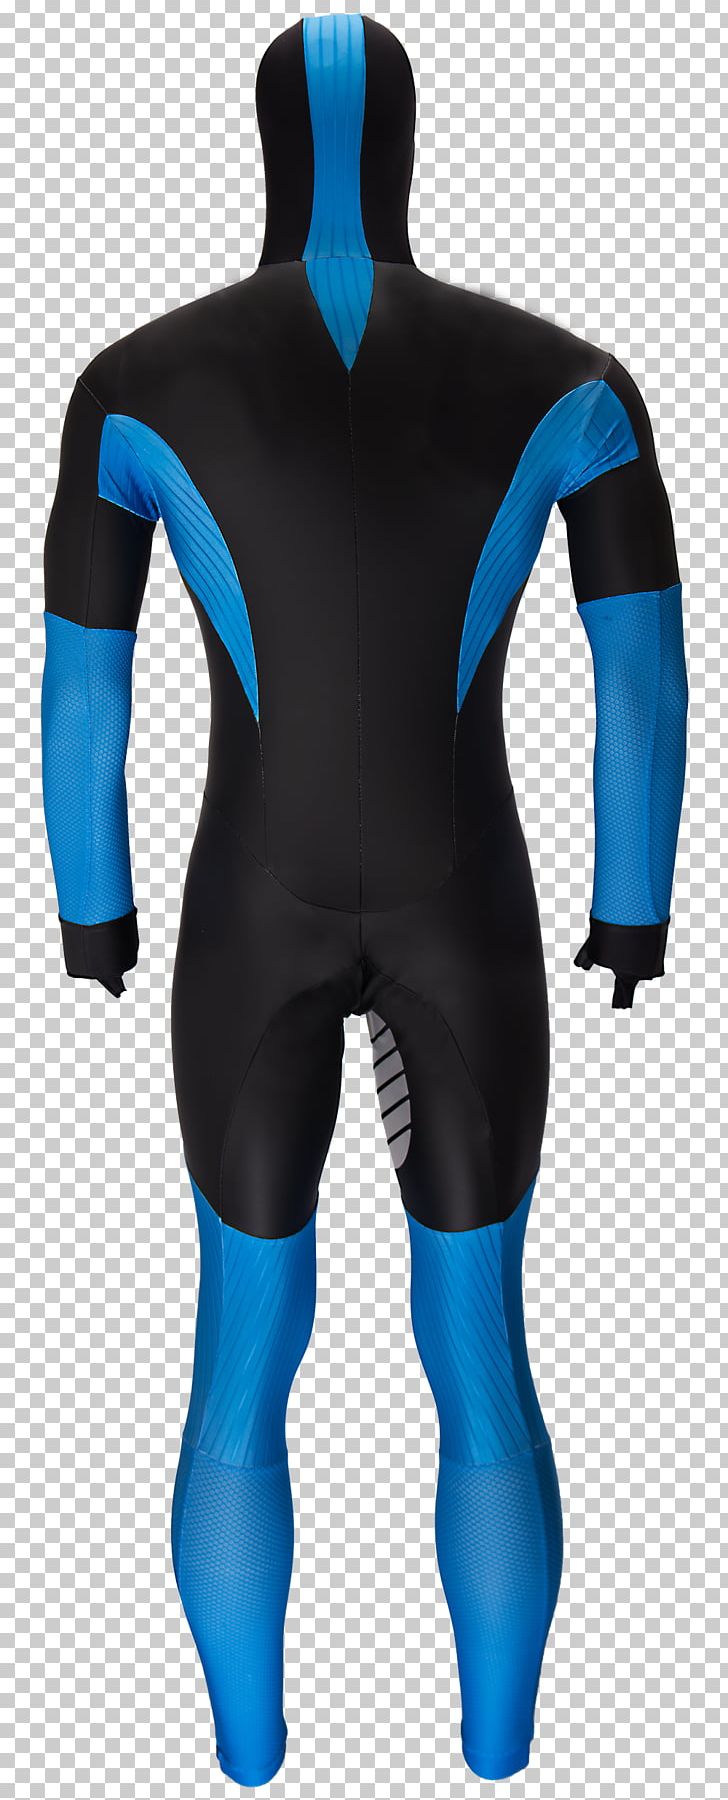 Wetsuit Speed Skating Dry Suit Nice PNG, Clipart, Blue, Clothing, Cobalt Blue, Dry Suit, Electric Blue Free PNG Download